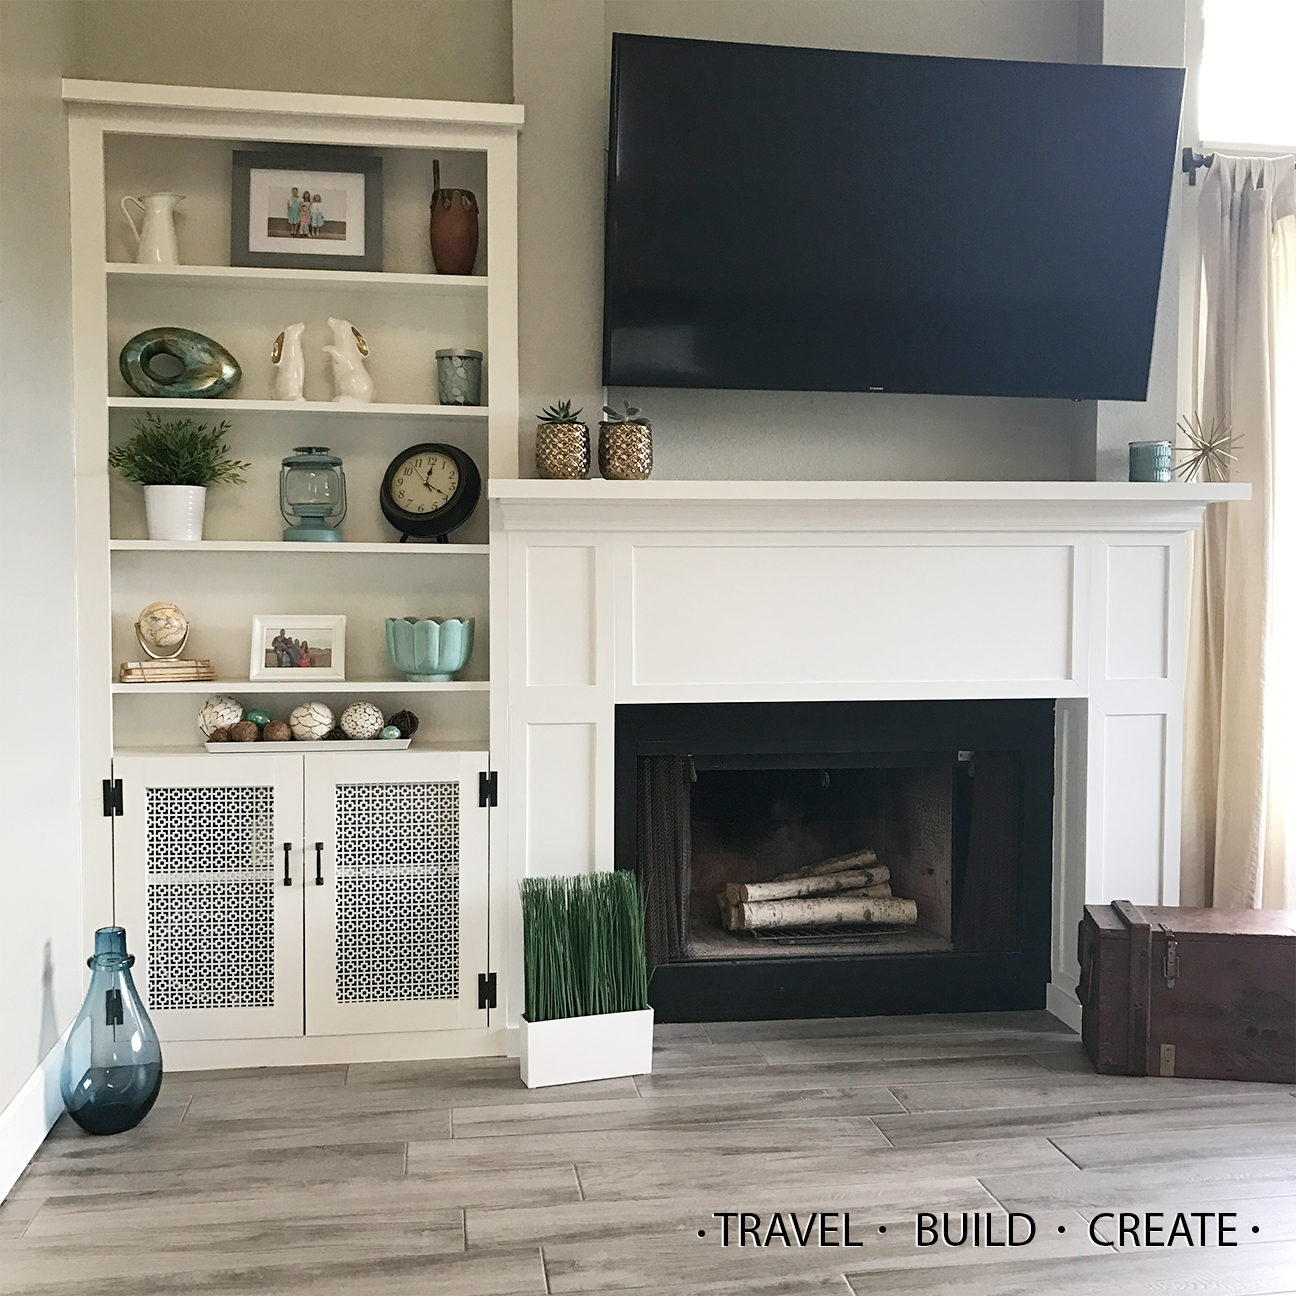 Diy Fireplace Surround And Built In, Built In Bookcase Fireplace Plans